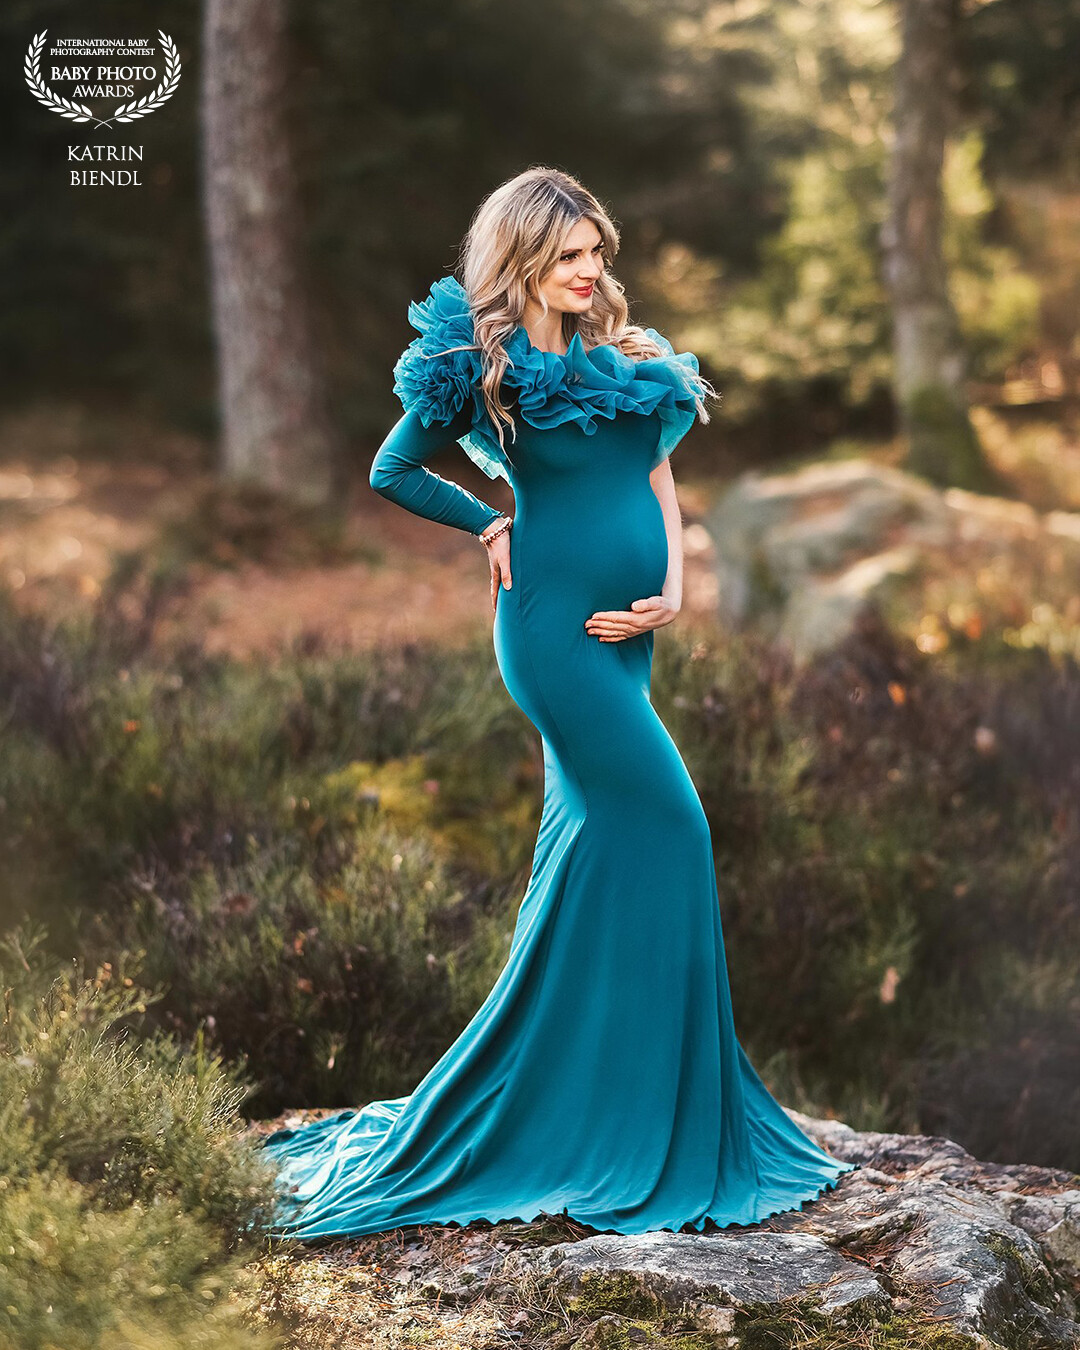 Pregnancy gives the expectant mother a special, wonderful bright aura. I love scenery of nature and I think it creates perfect frame for a maternity shooting.